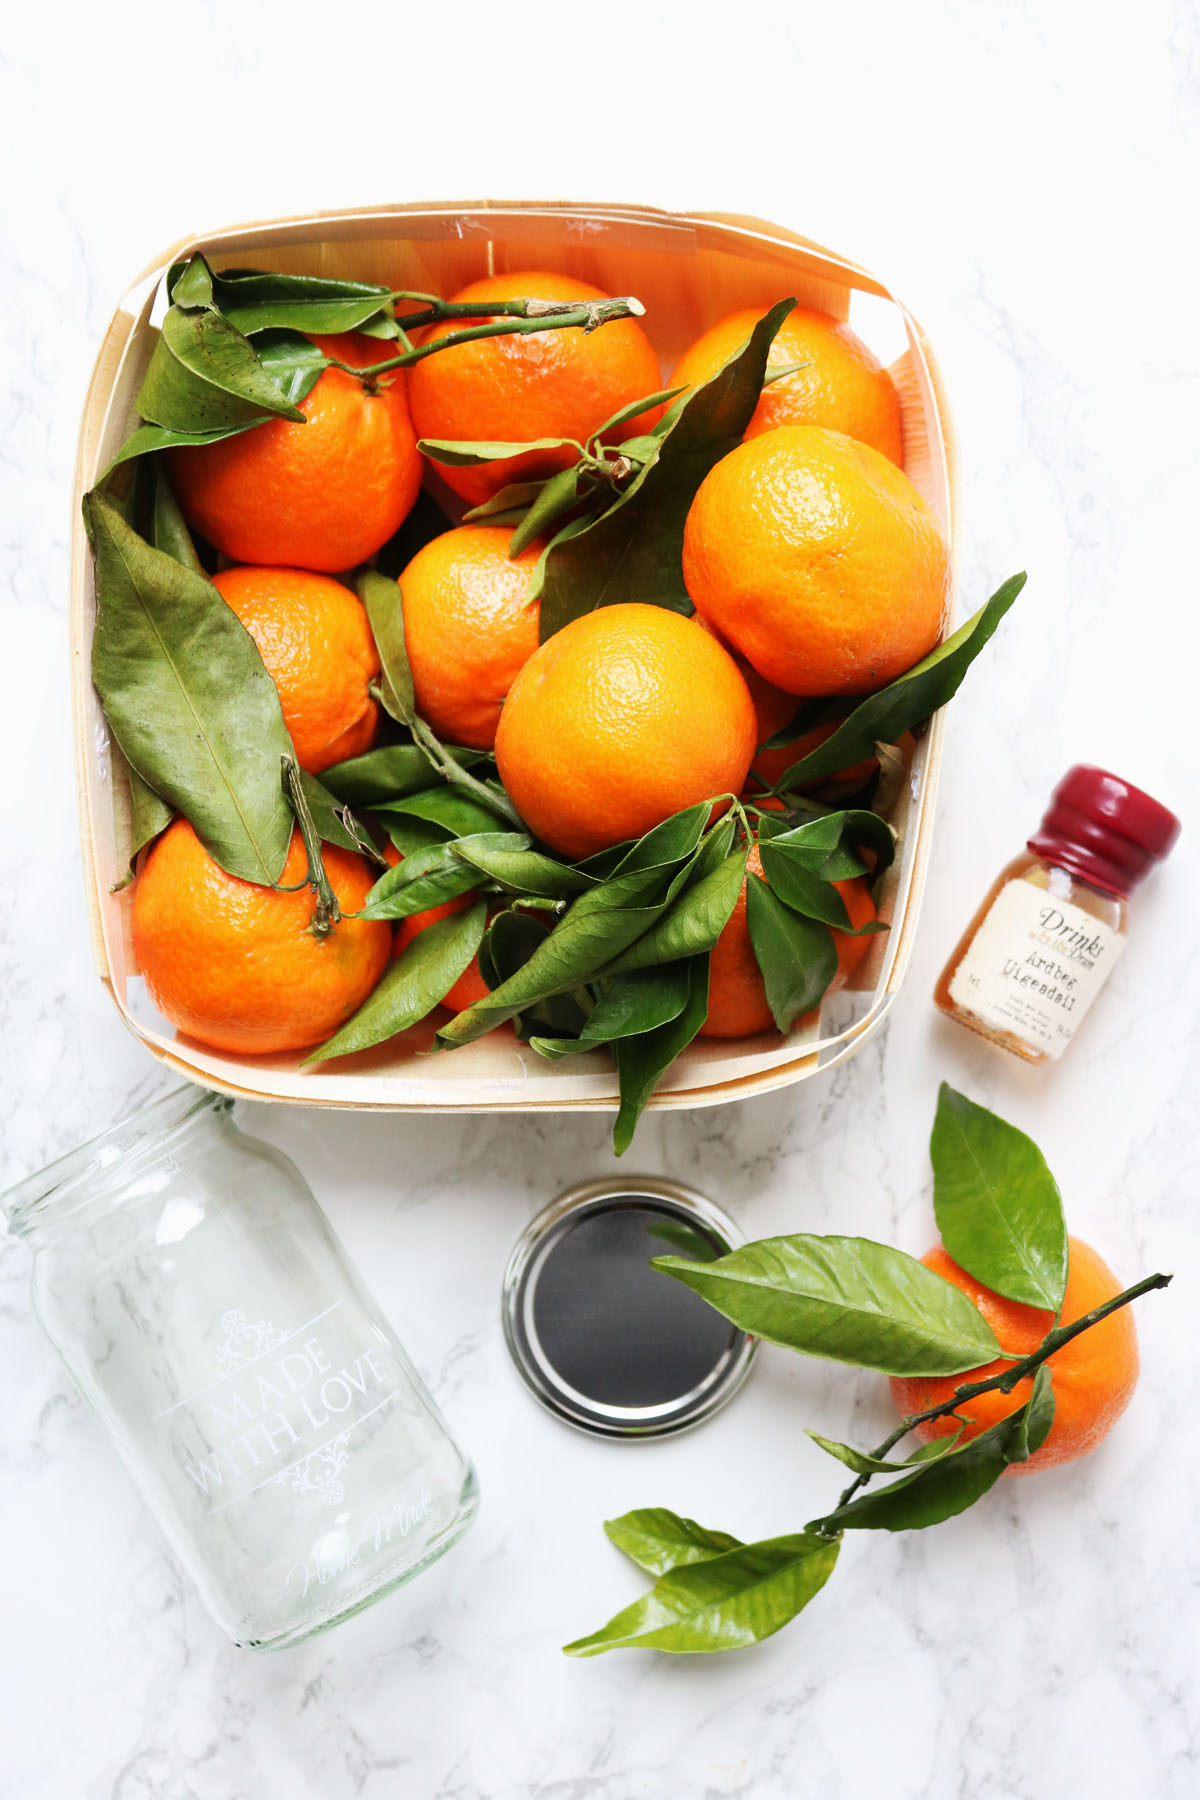 How to make whisky marmalade with clementines